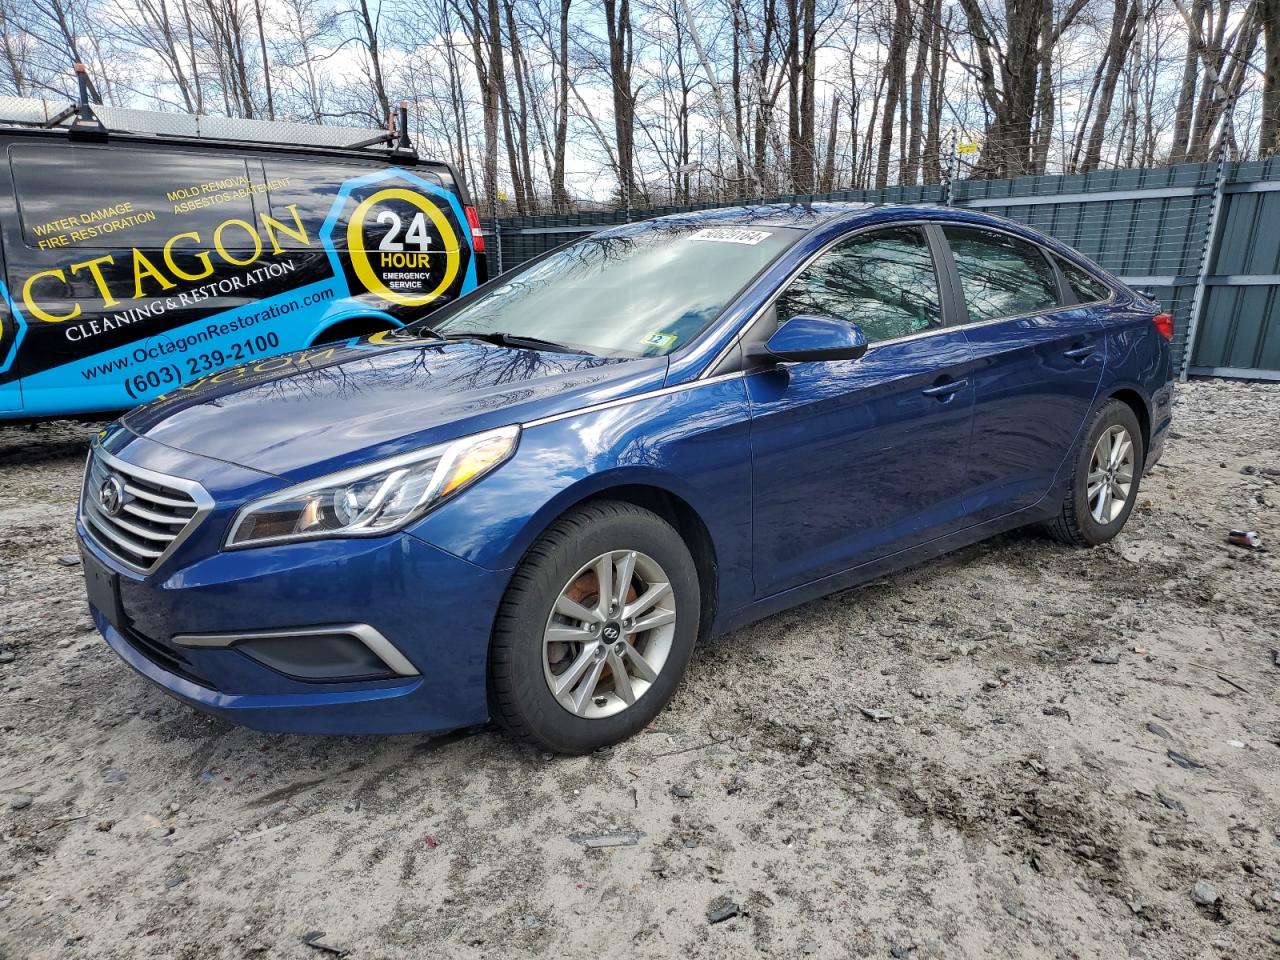 vin: 5NPE24AF1HH540854 5NPE24AF1HH540854 2017 hyundai sonata 2400 for Sale in 03034 2111, Nh - Candia, Candia, New Hampshire, USA